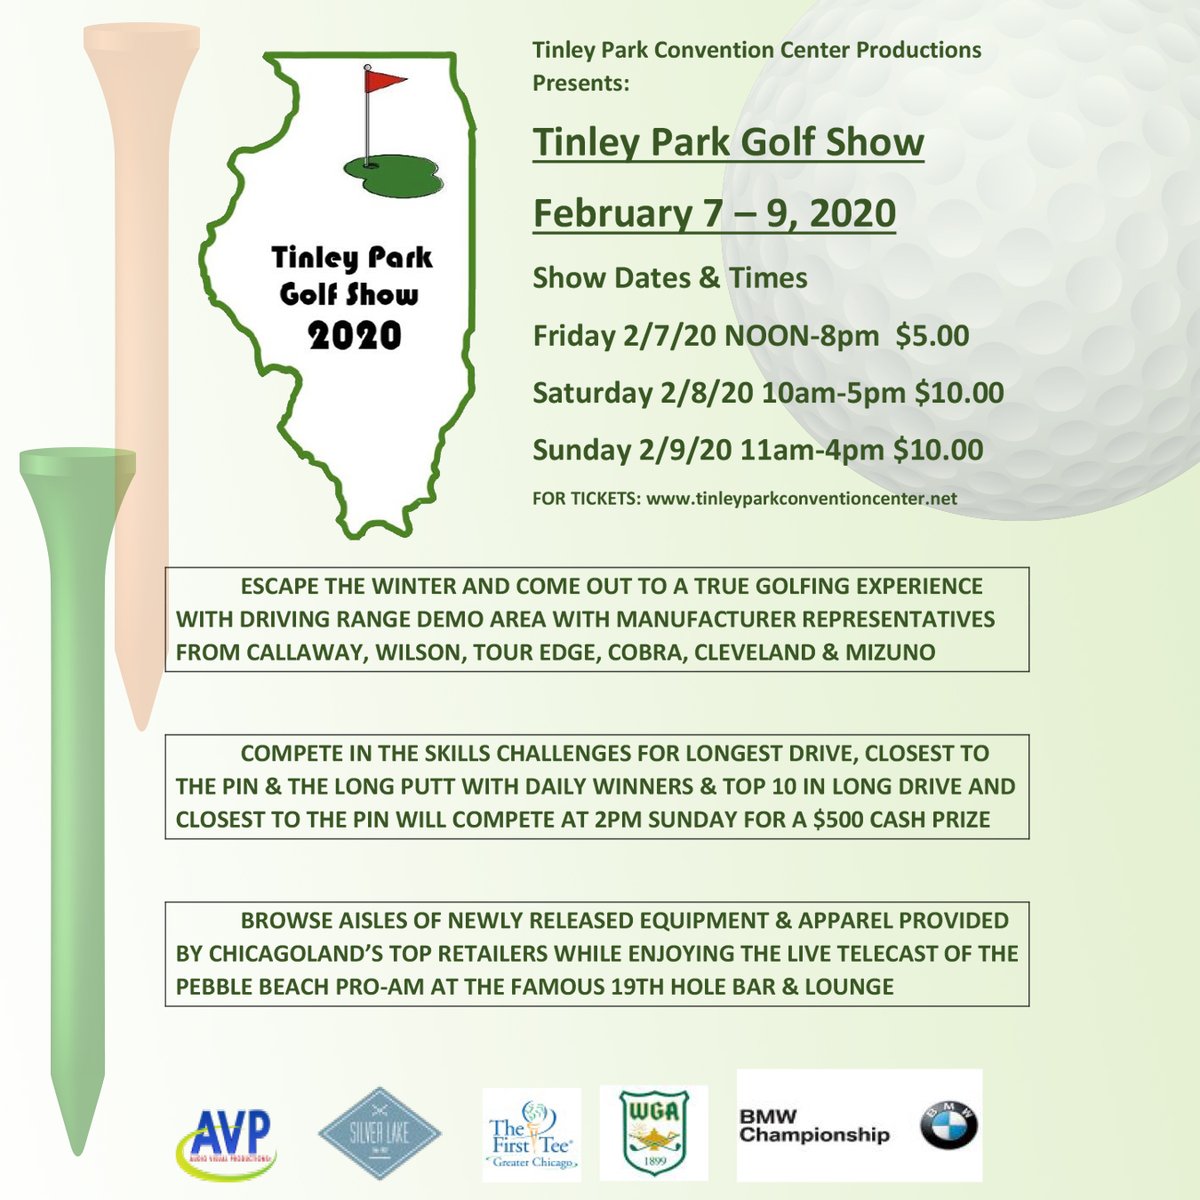 Schedule your mid-winter stretch & think spring as you escape, compete and browse at the @TinleyParkCC coming up in February! #VisitSouthland, #EnjoyIllinois, #GetOutside, #TinleyPark, #Golf